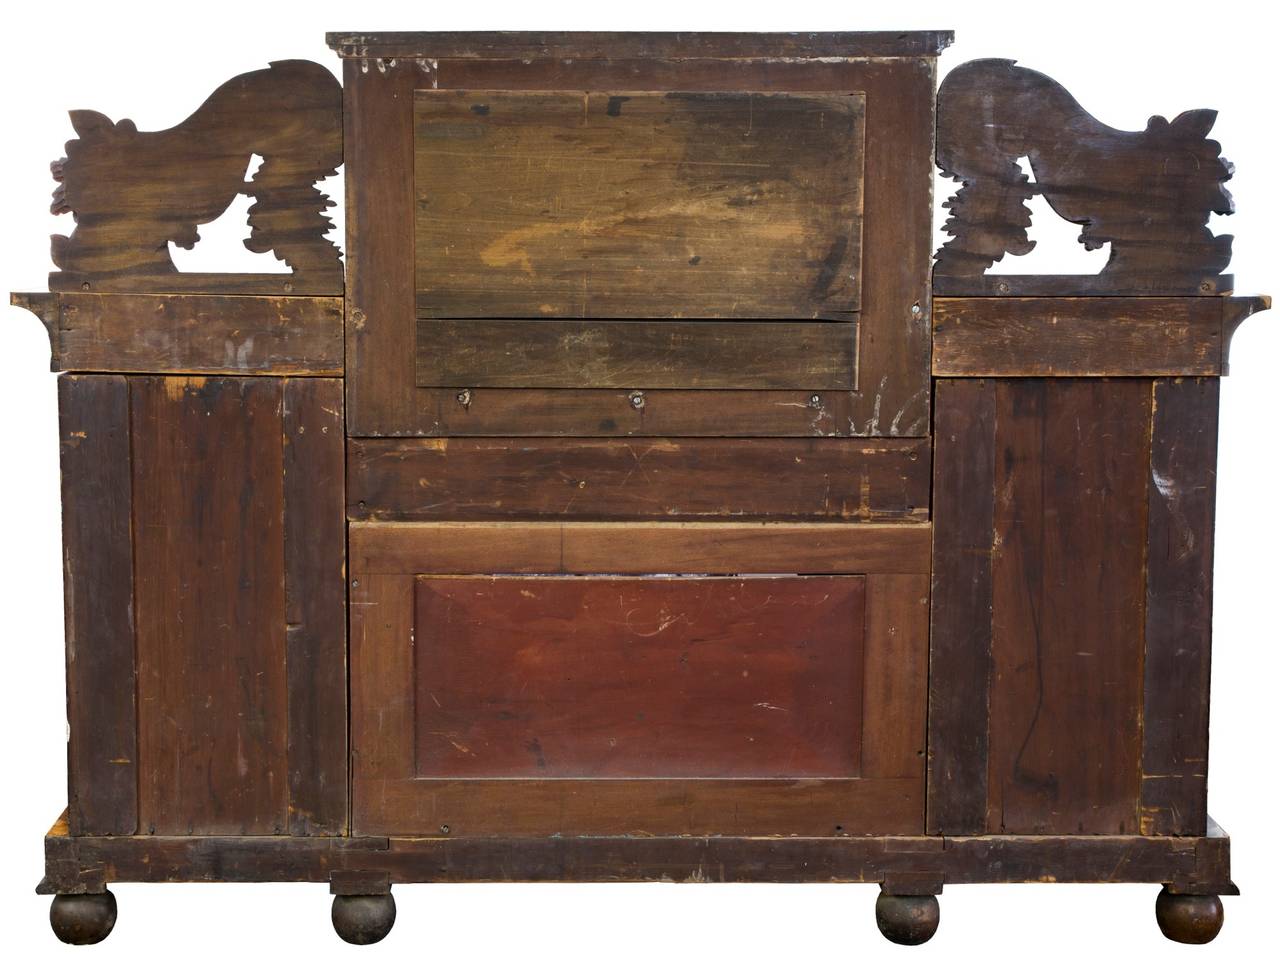 This sideboard form, for its time was fairly novel, appearing in the October 1822 issue of Ackerman’s Repository. The pyramidal doors open without suggestion of their being doors and the drawers above are architecturally developed within the cornice